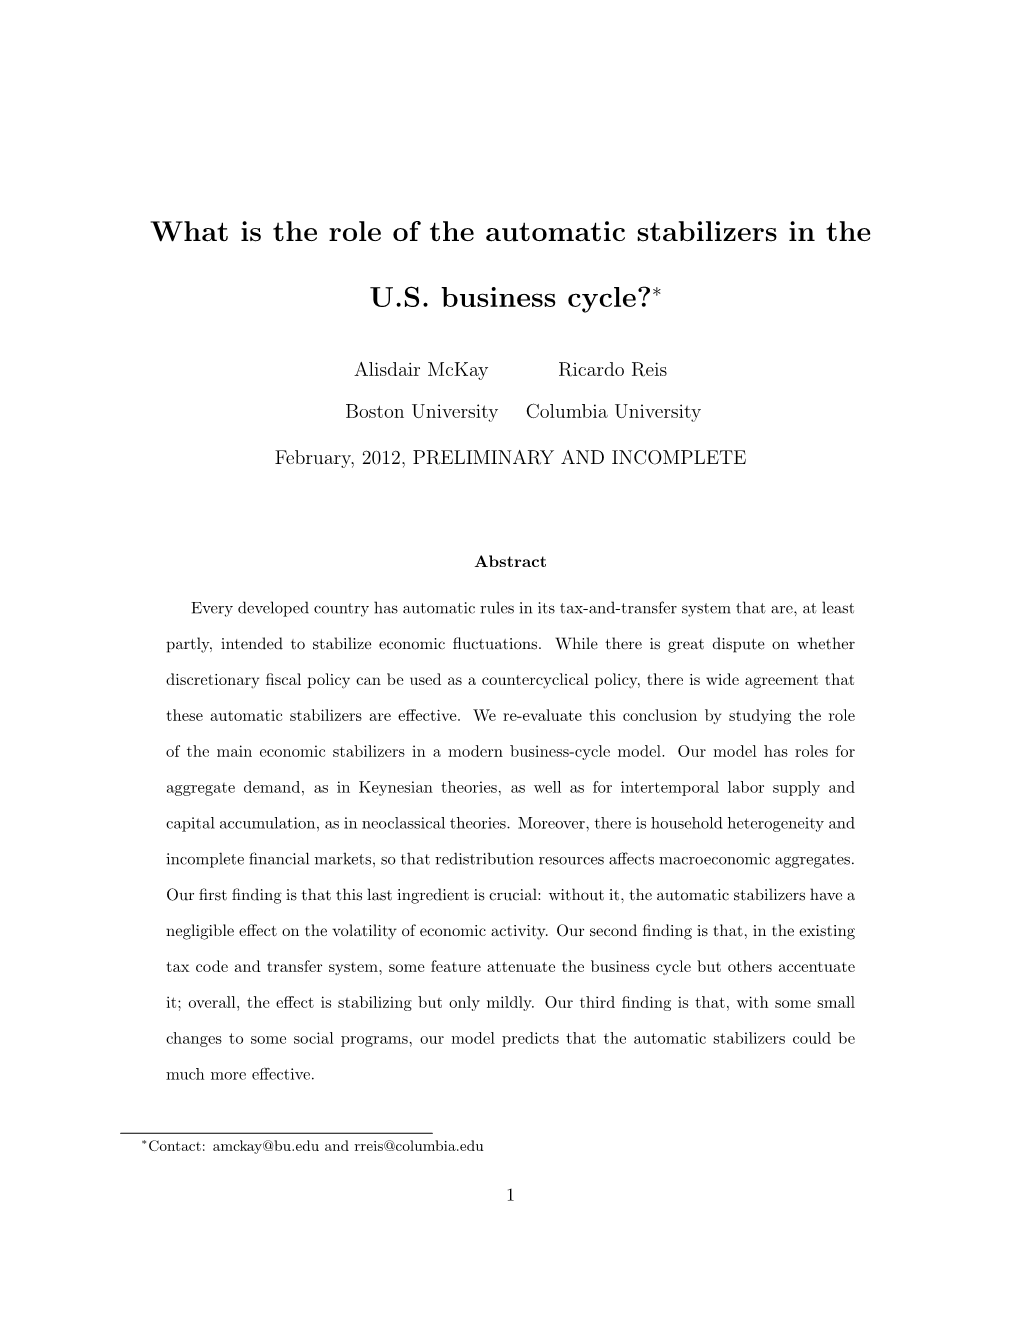 What Is the Role of the Automatic Stabilizers in the U.S. Business Cycle?